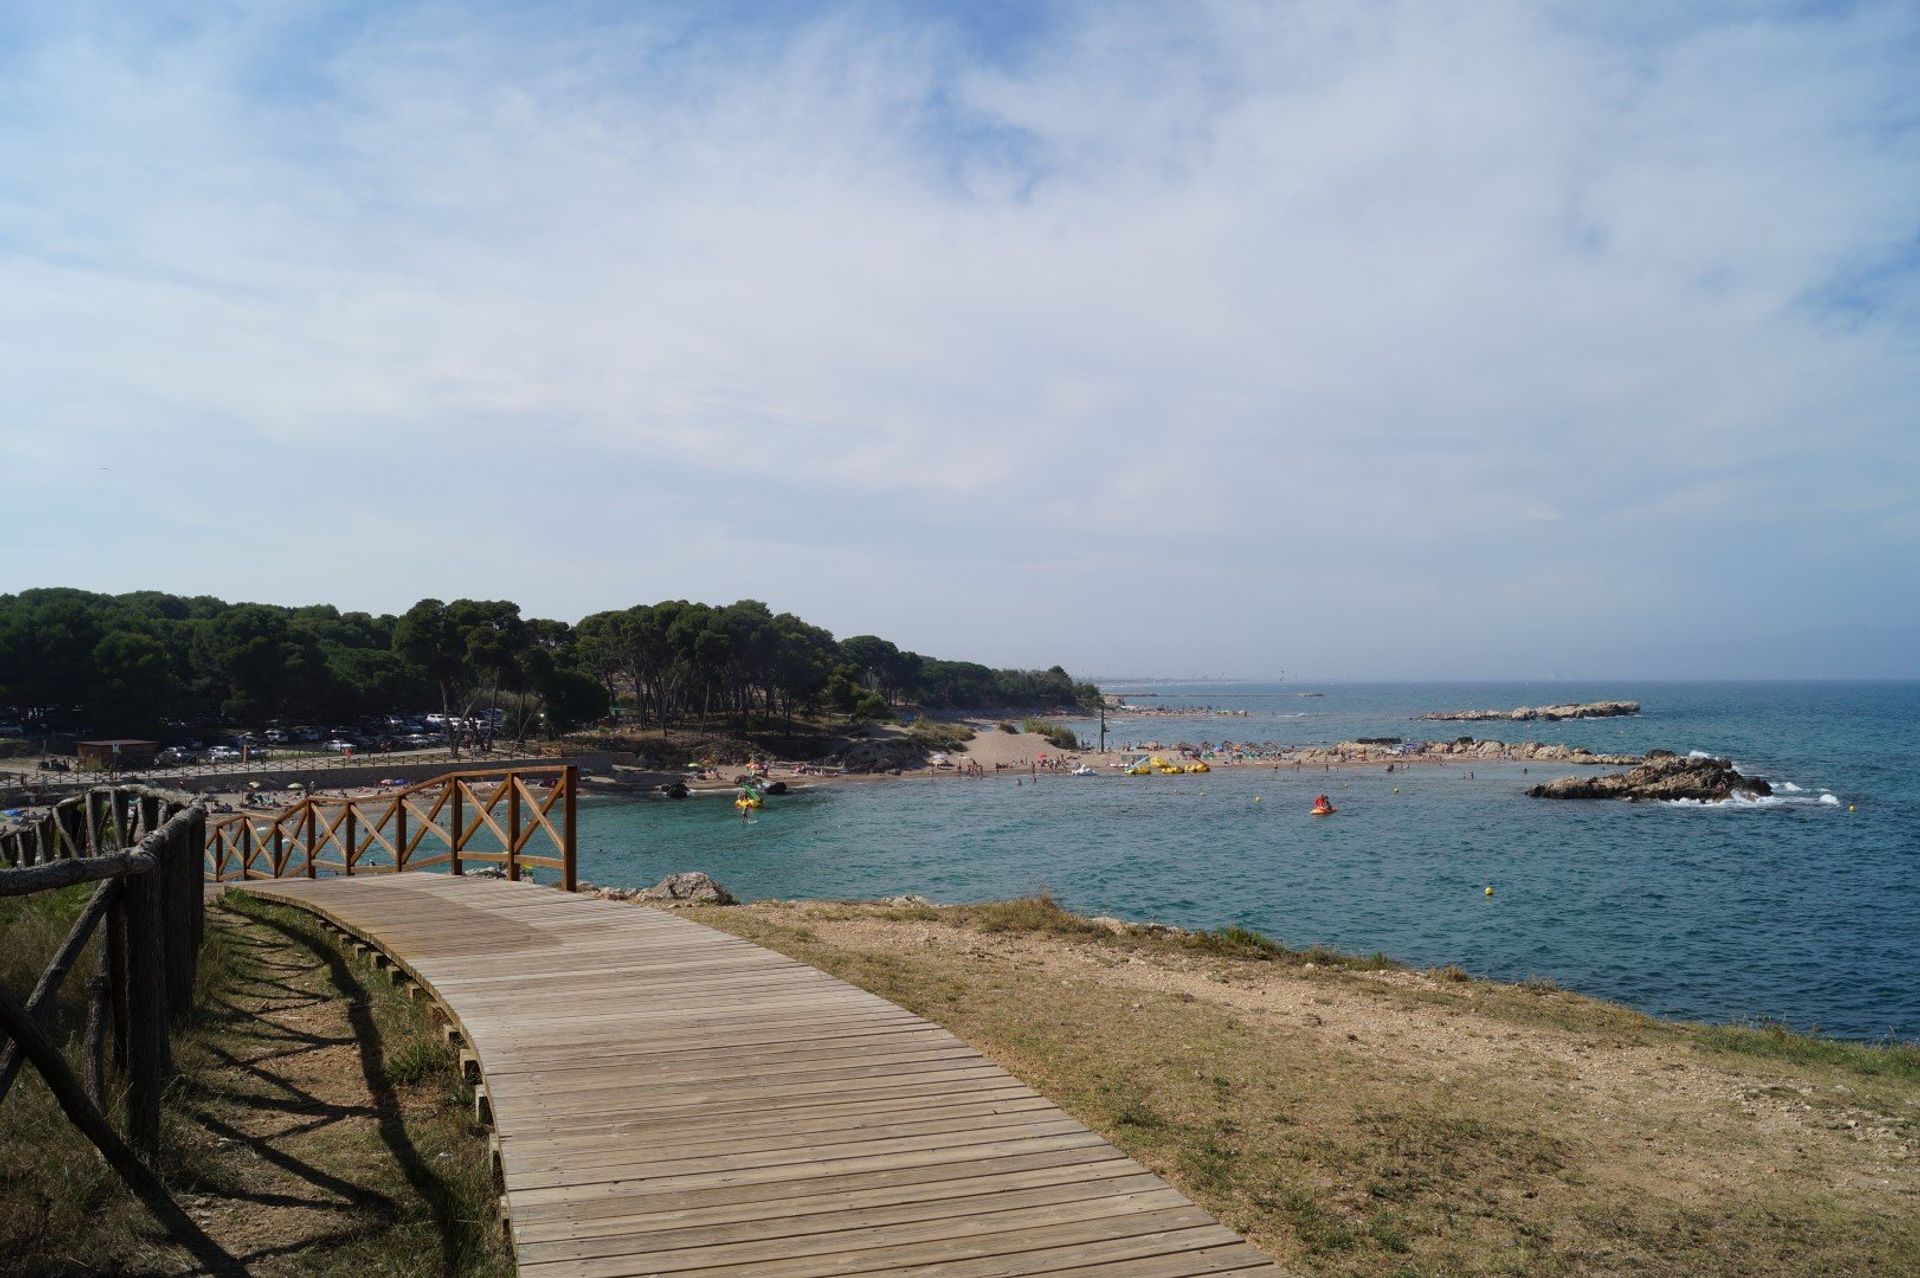 Discover L'Escala's hidden beaches, coves and rocky cliffs with a walk along Passeig d'Empuries